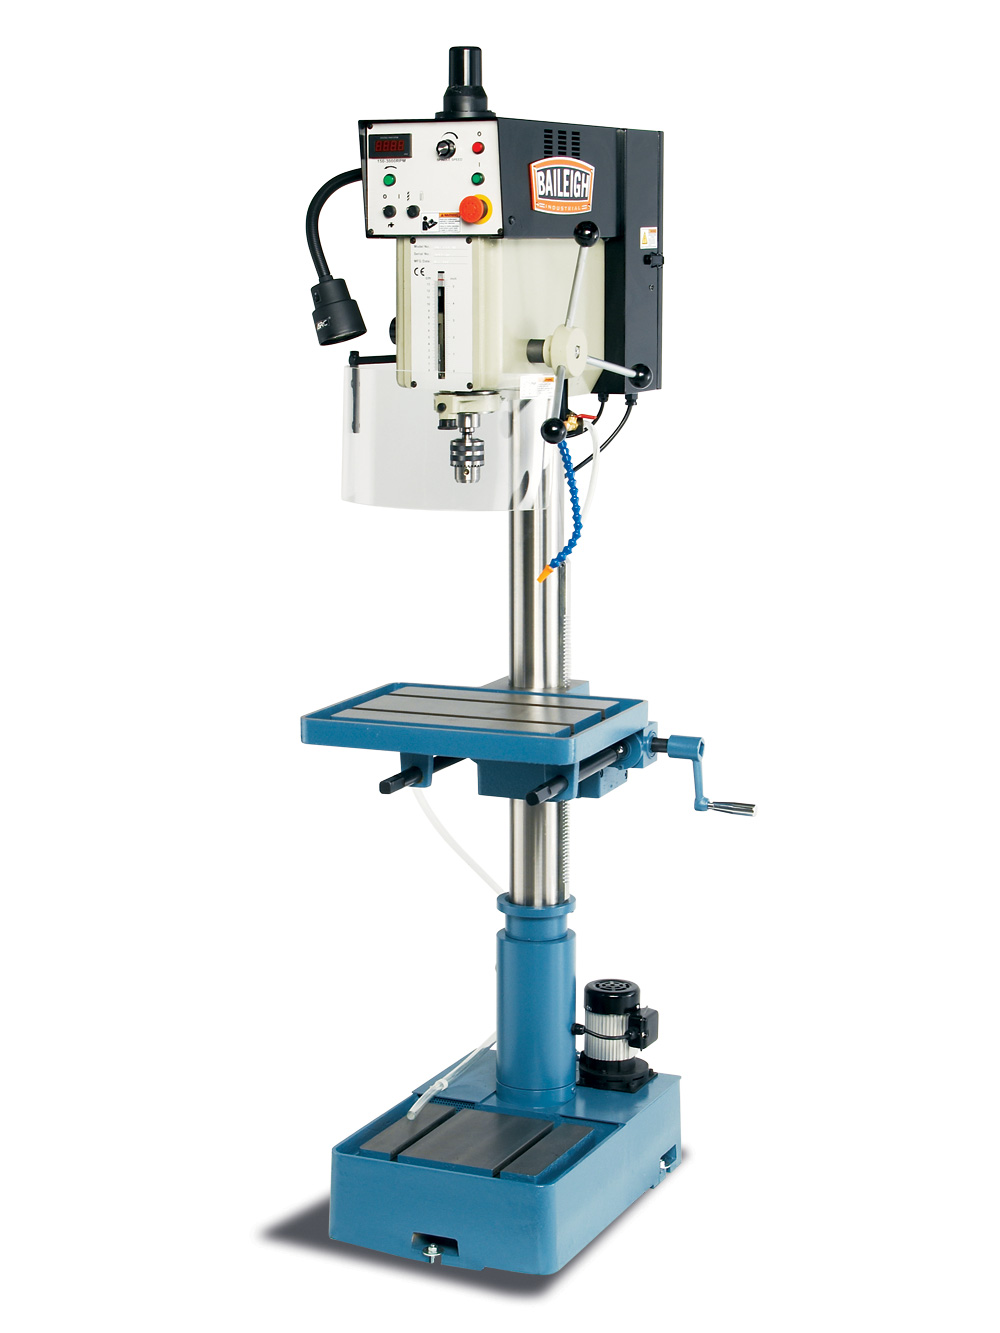 Baileigh Drill Press Variable Speed DP-1000VS Image